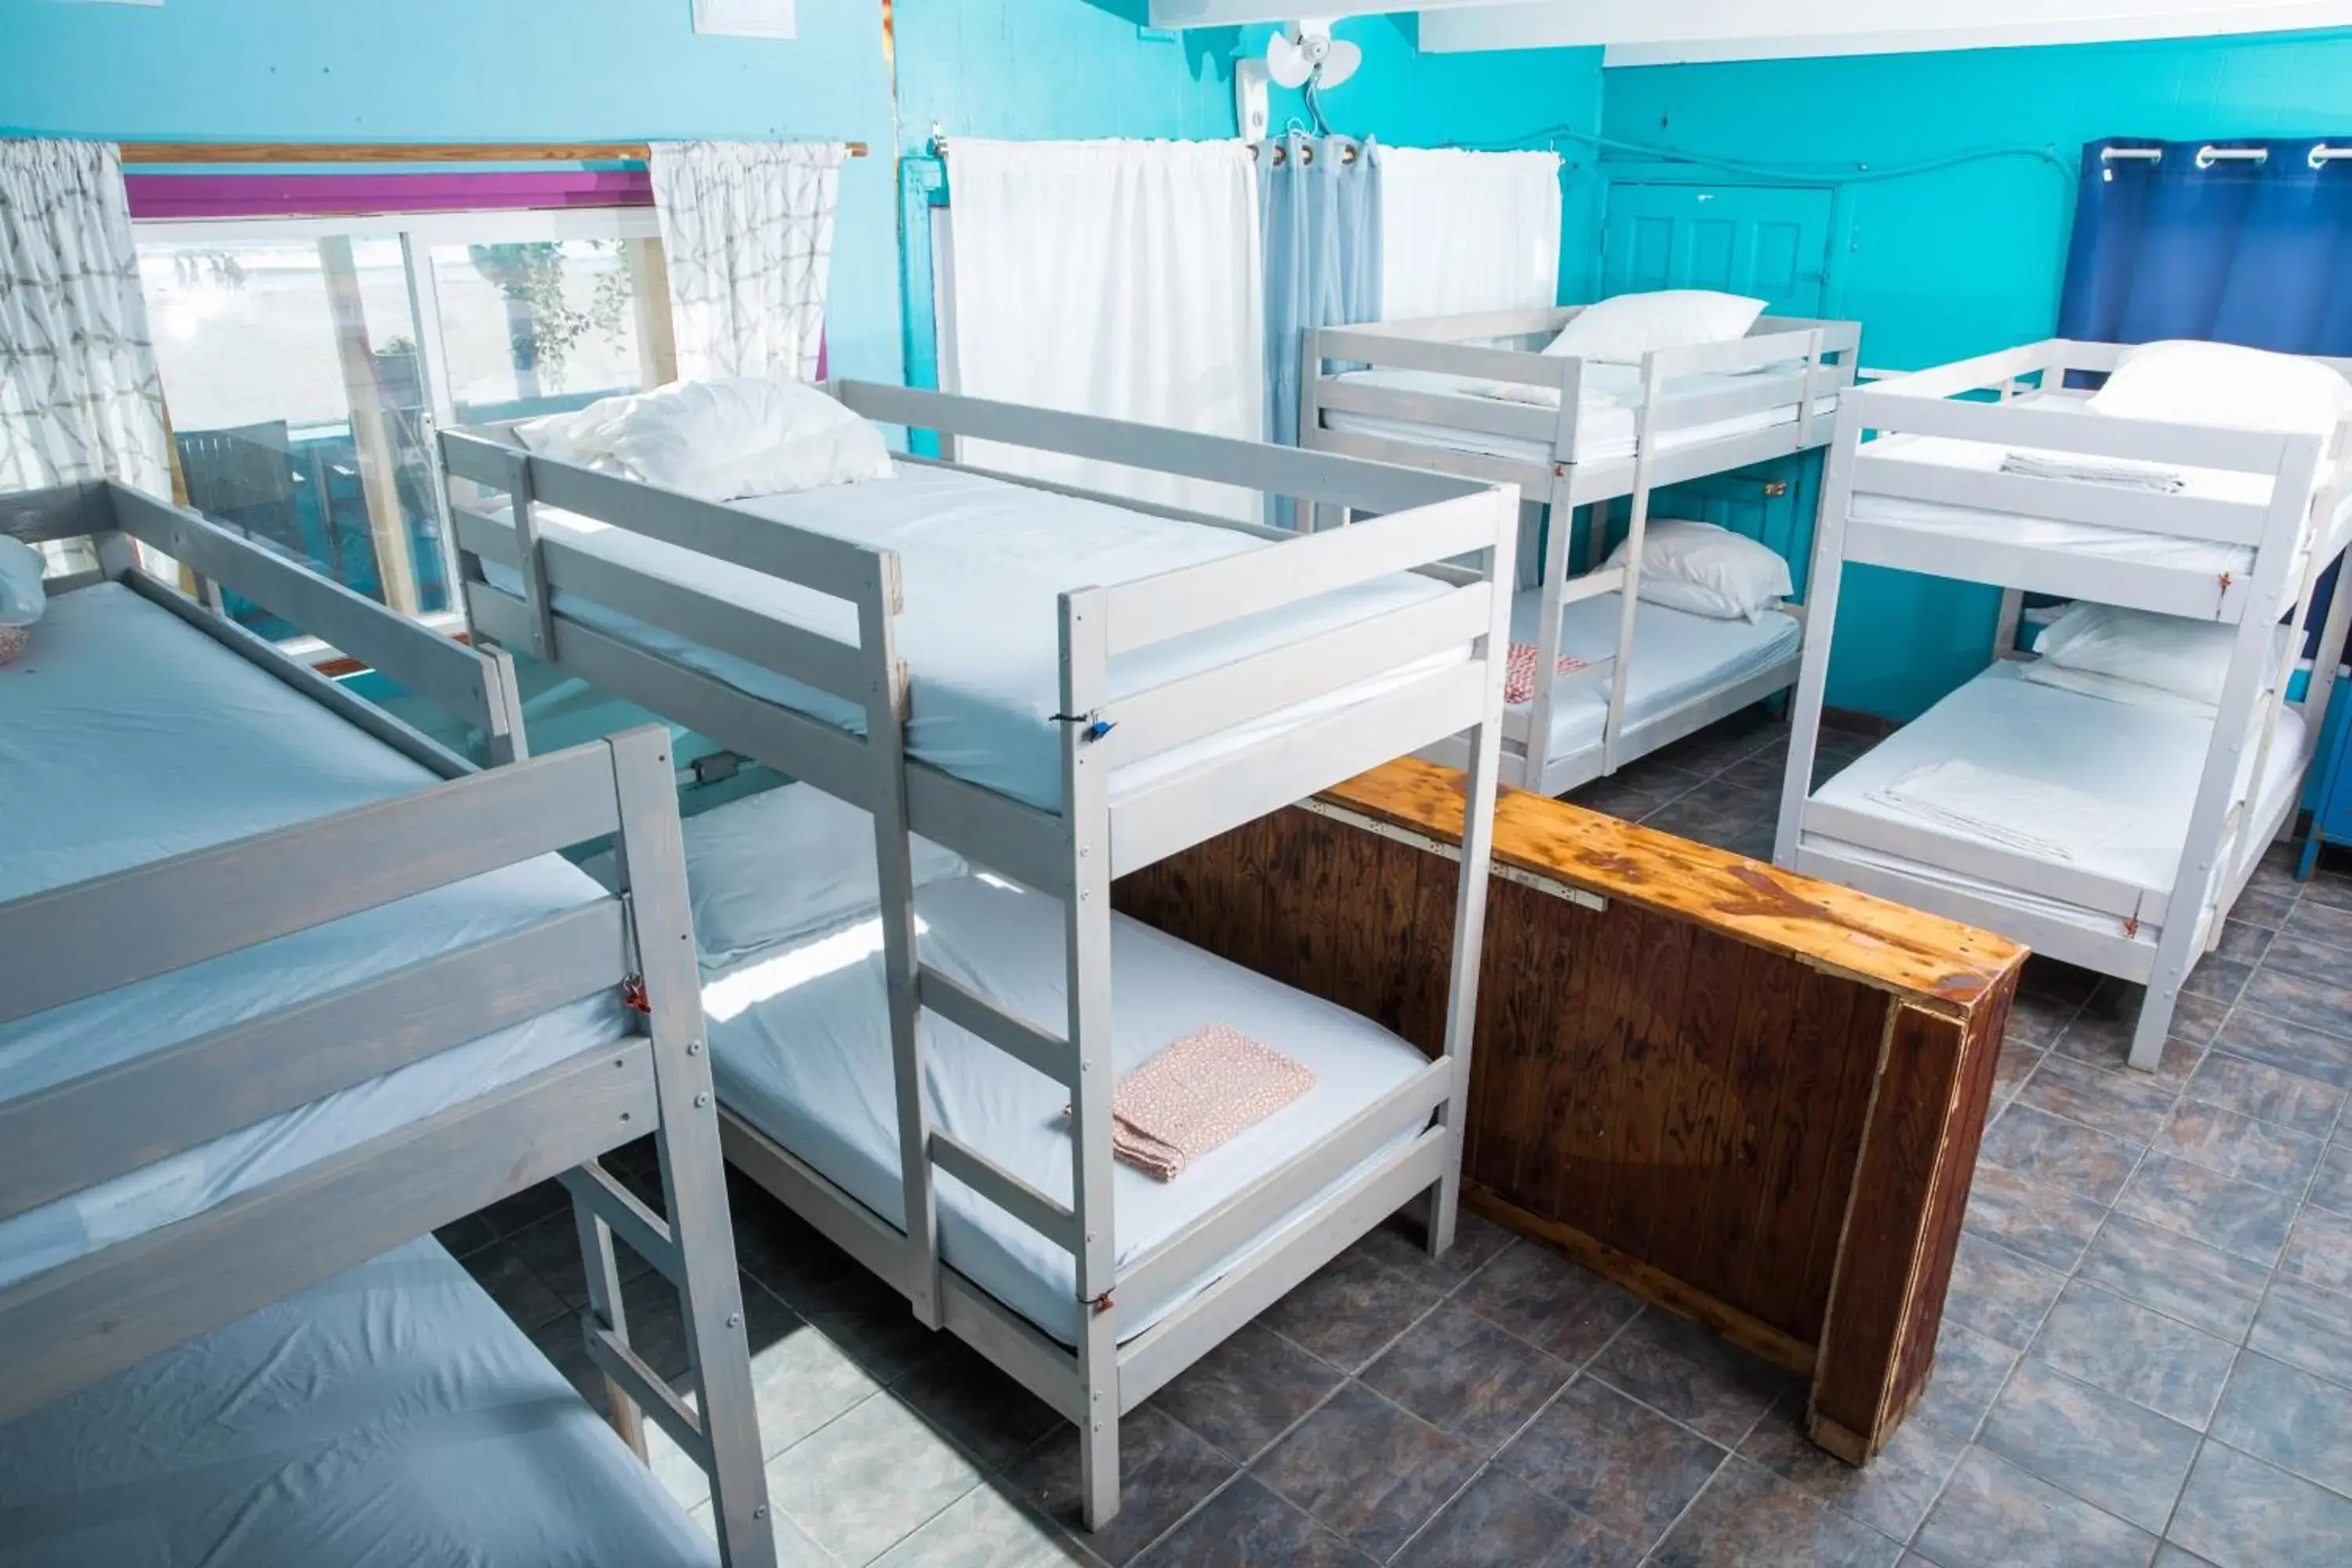 bunk bed in ITH Beach Bungalow Surf Hostel San Diego